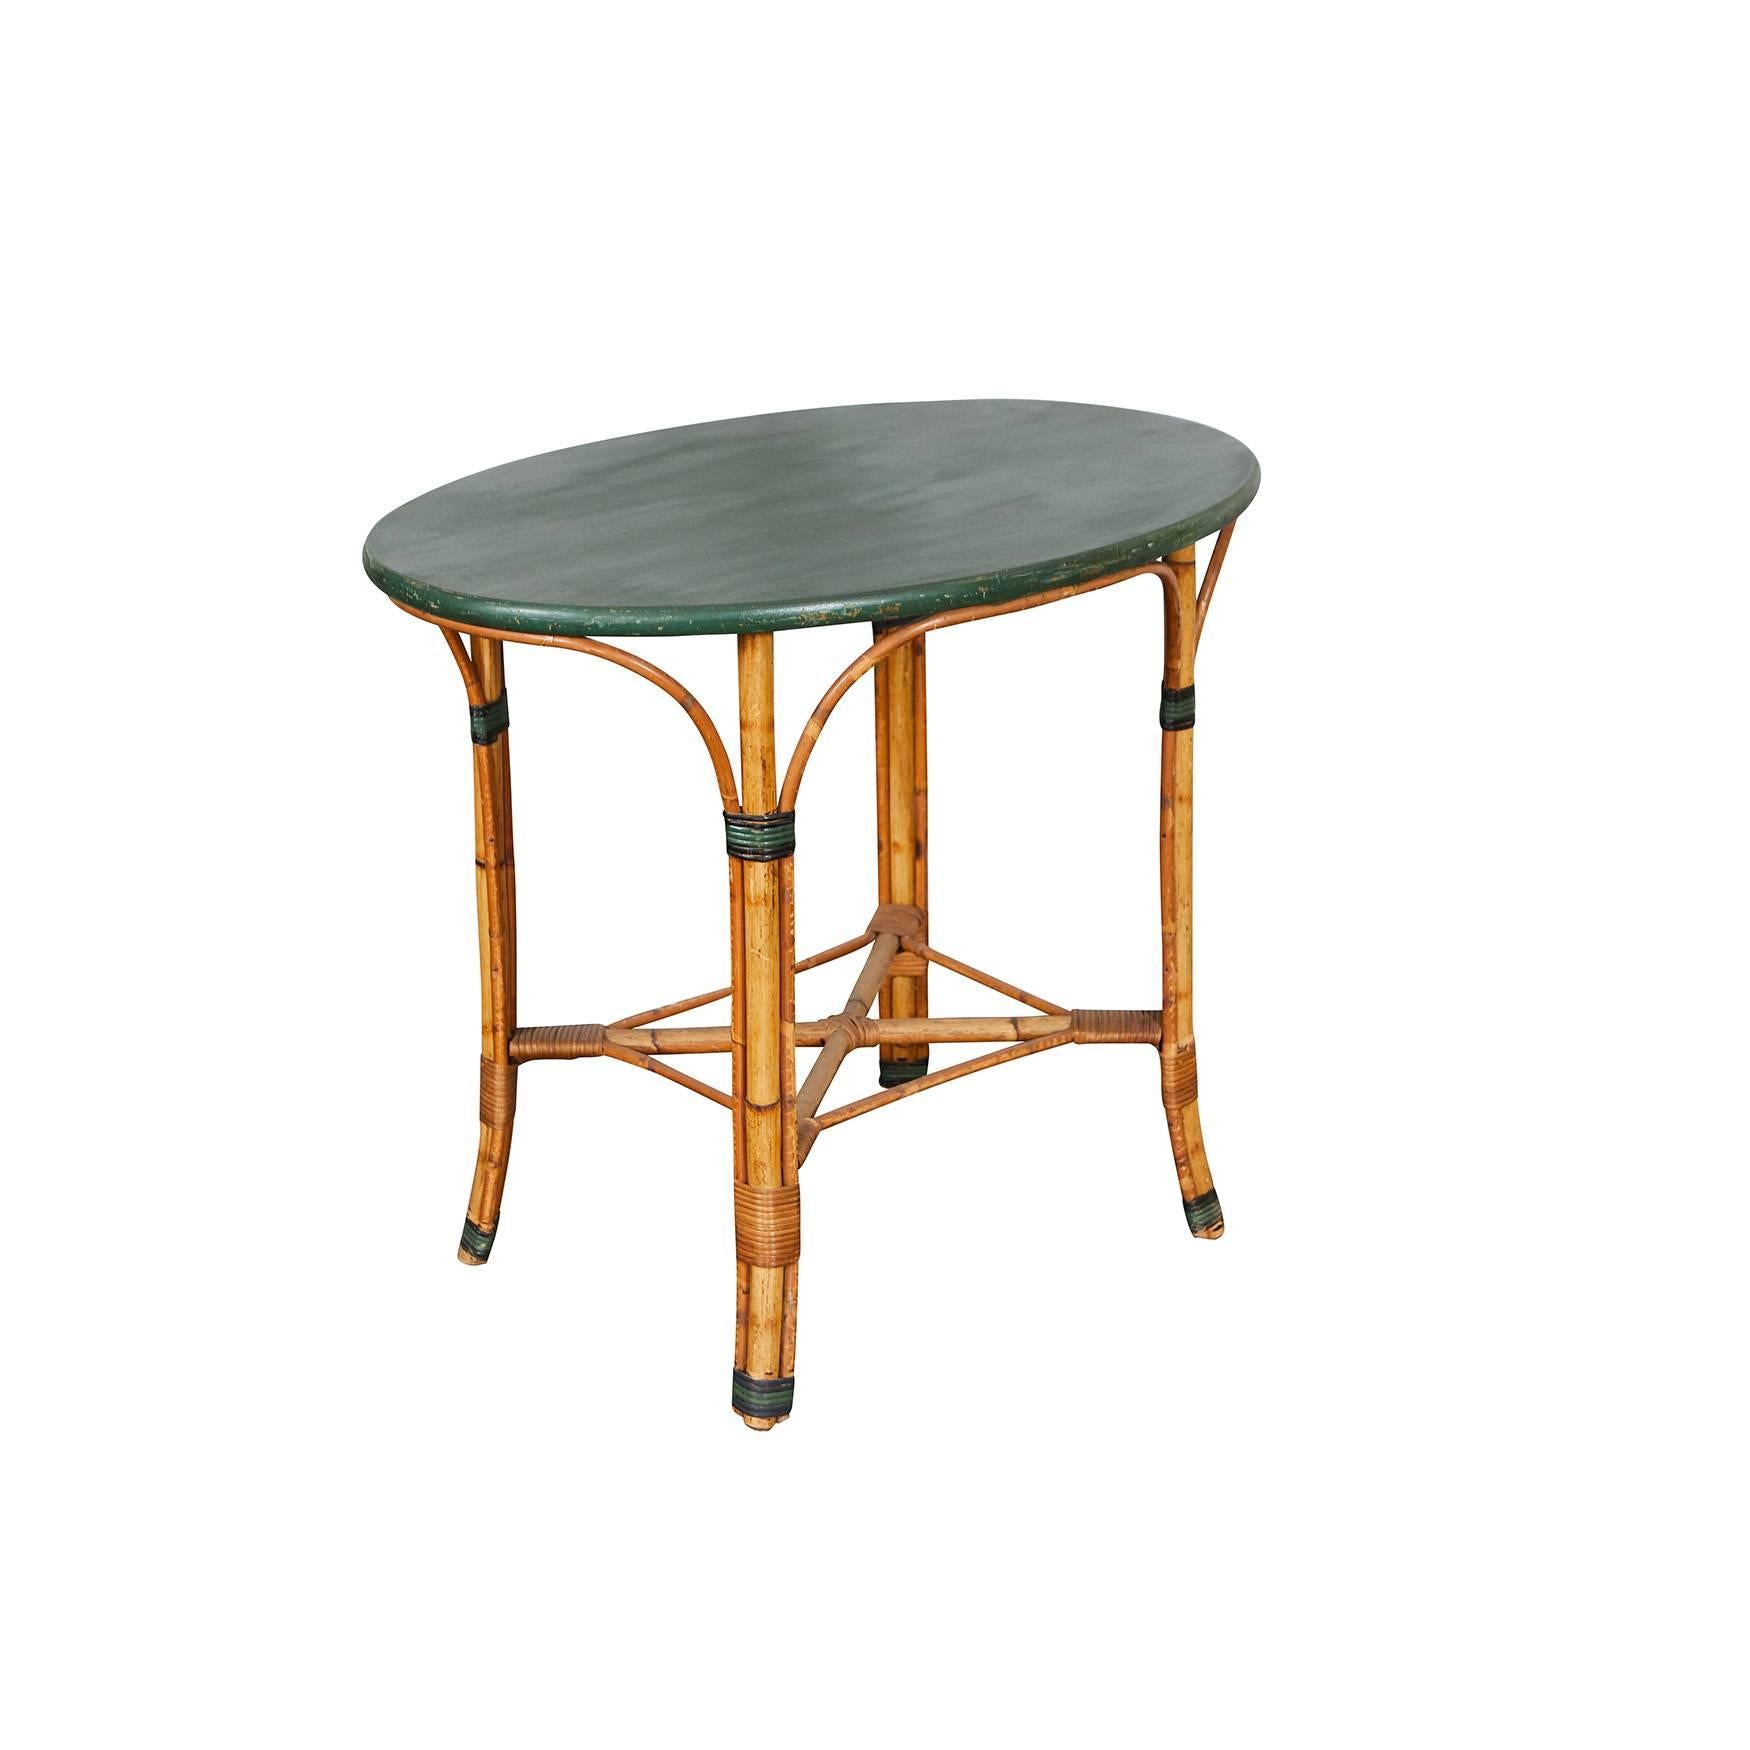 This 1940s table has a green painted solid wood oval top and bamboo legs. The table has the original painted finish with natural signs of age and wear. Note the nice black and green painted pattern on the reed bands on each leg. 


